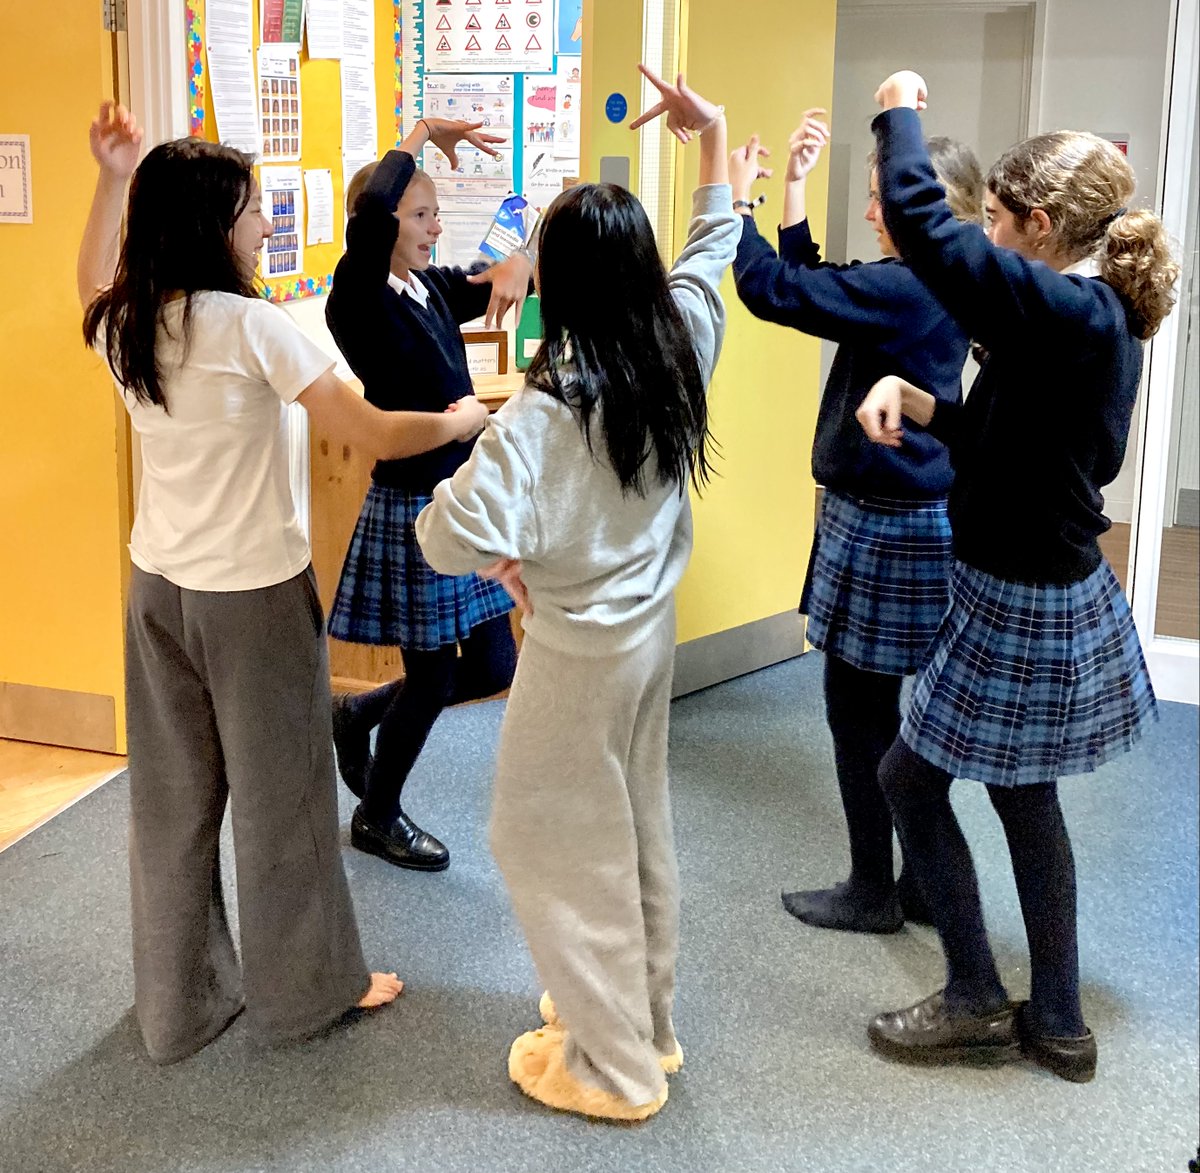 Big smiles all round as Leeds House extended a warm welcome to a group of Thai students who are studying at Mayfield for the summer term! Our Spanish girls and the Thai students discovered a universal language in dance, exchanging and teaching each other their moves.